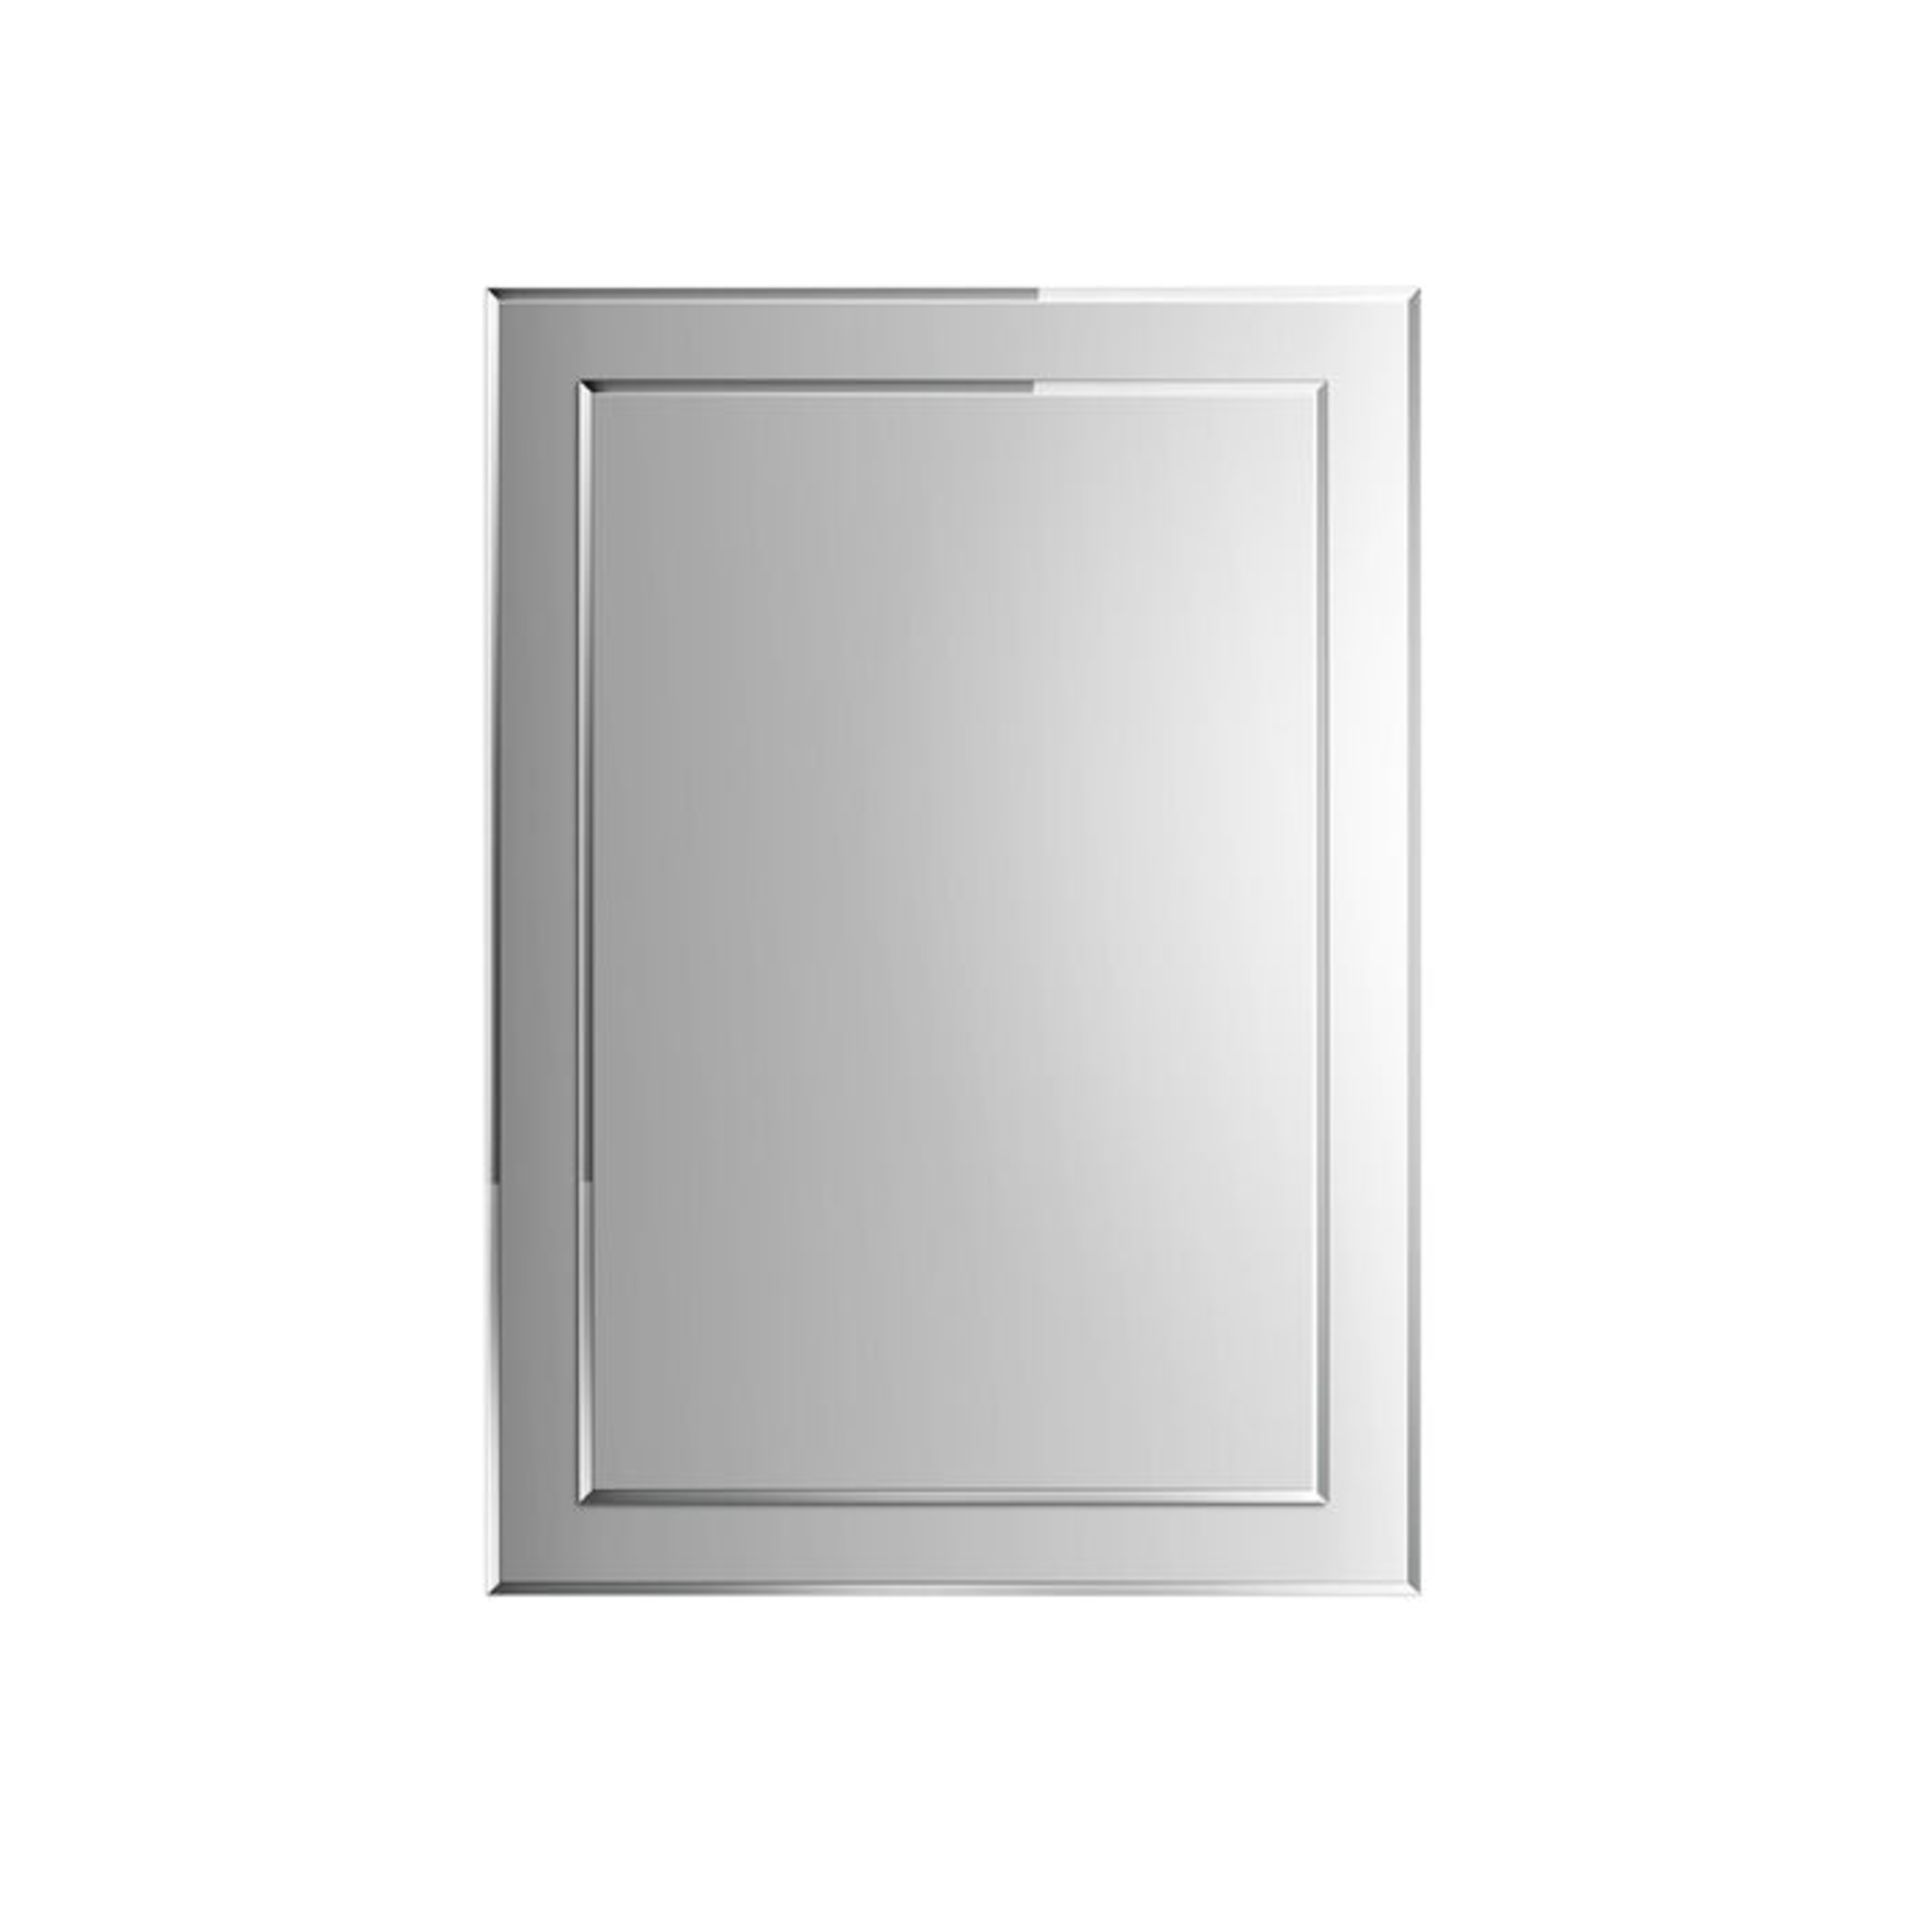 500x700mm Bevel Mirror . Comes fully assembled for added convenience Versatile with a choice of...